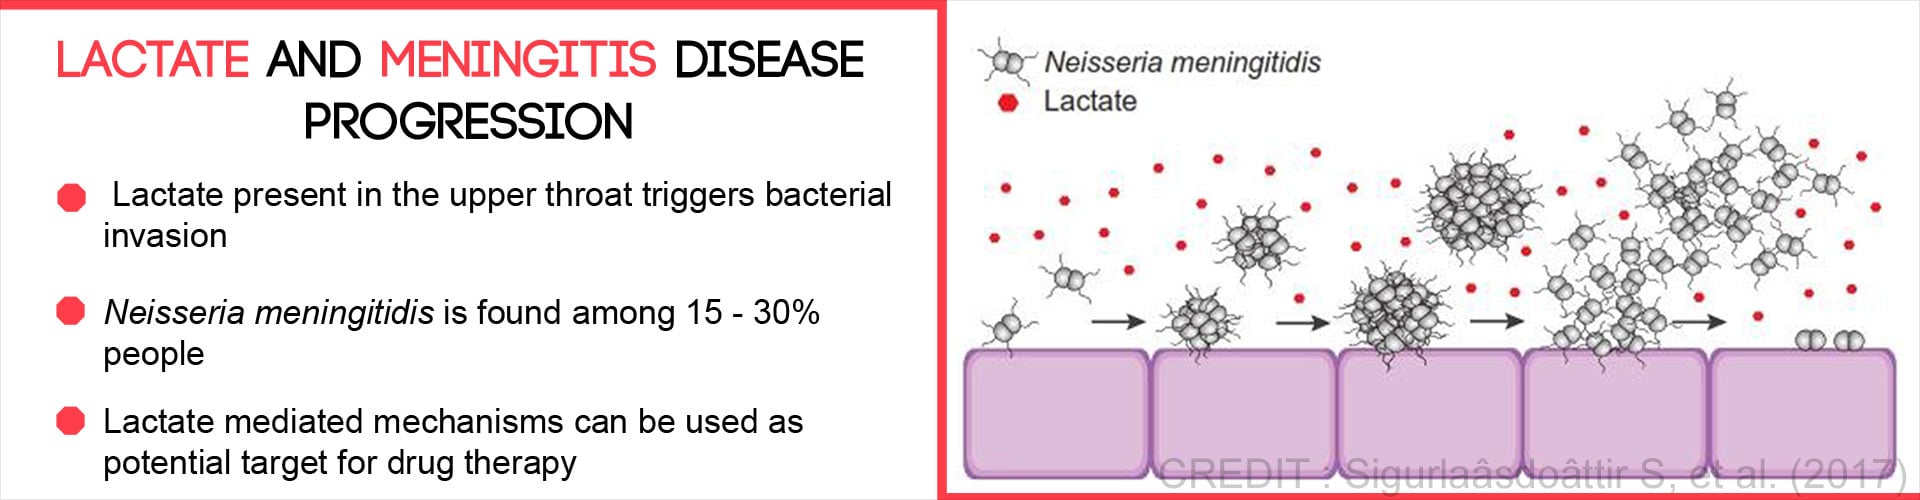 Lactate and Meningitis Disease Progression
- Lactate present in the upper throat trigger bacterial invasion
- Neisseria meningitidis is found among 15-30% people
- Lactate mediated mechanisms can be used as potential target for drug therapy